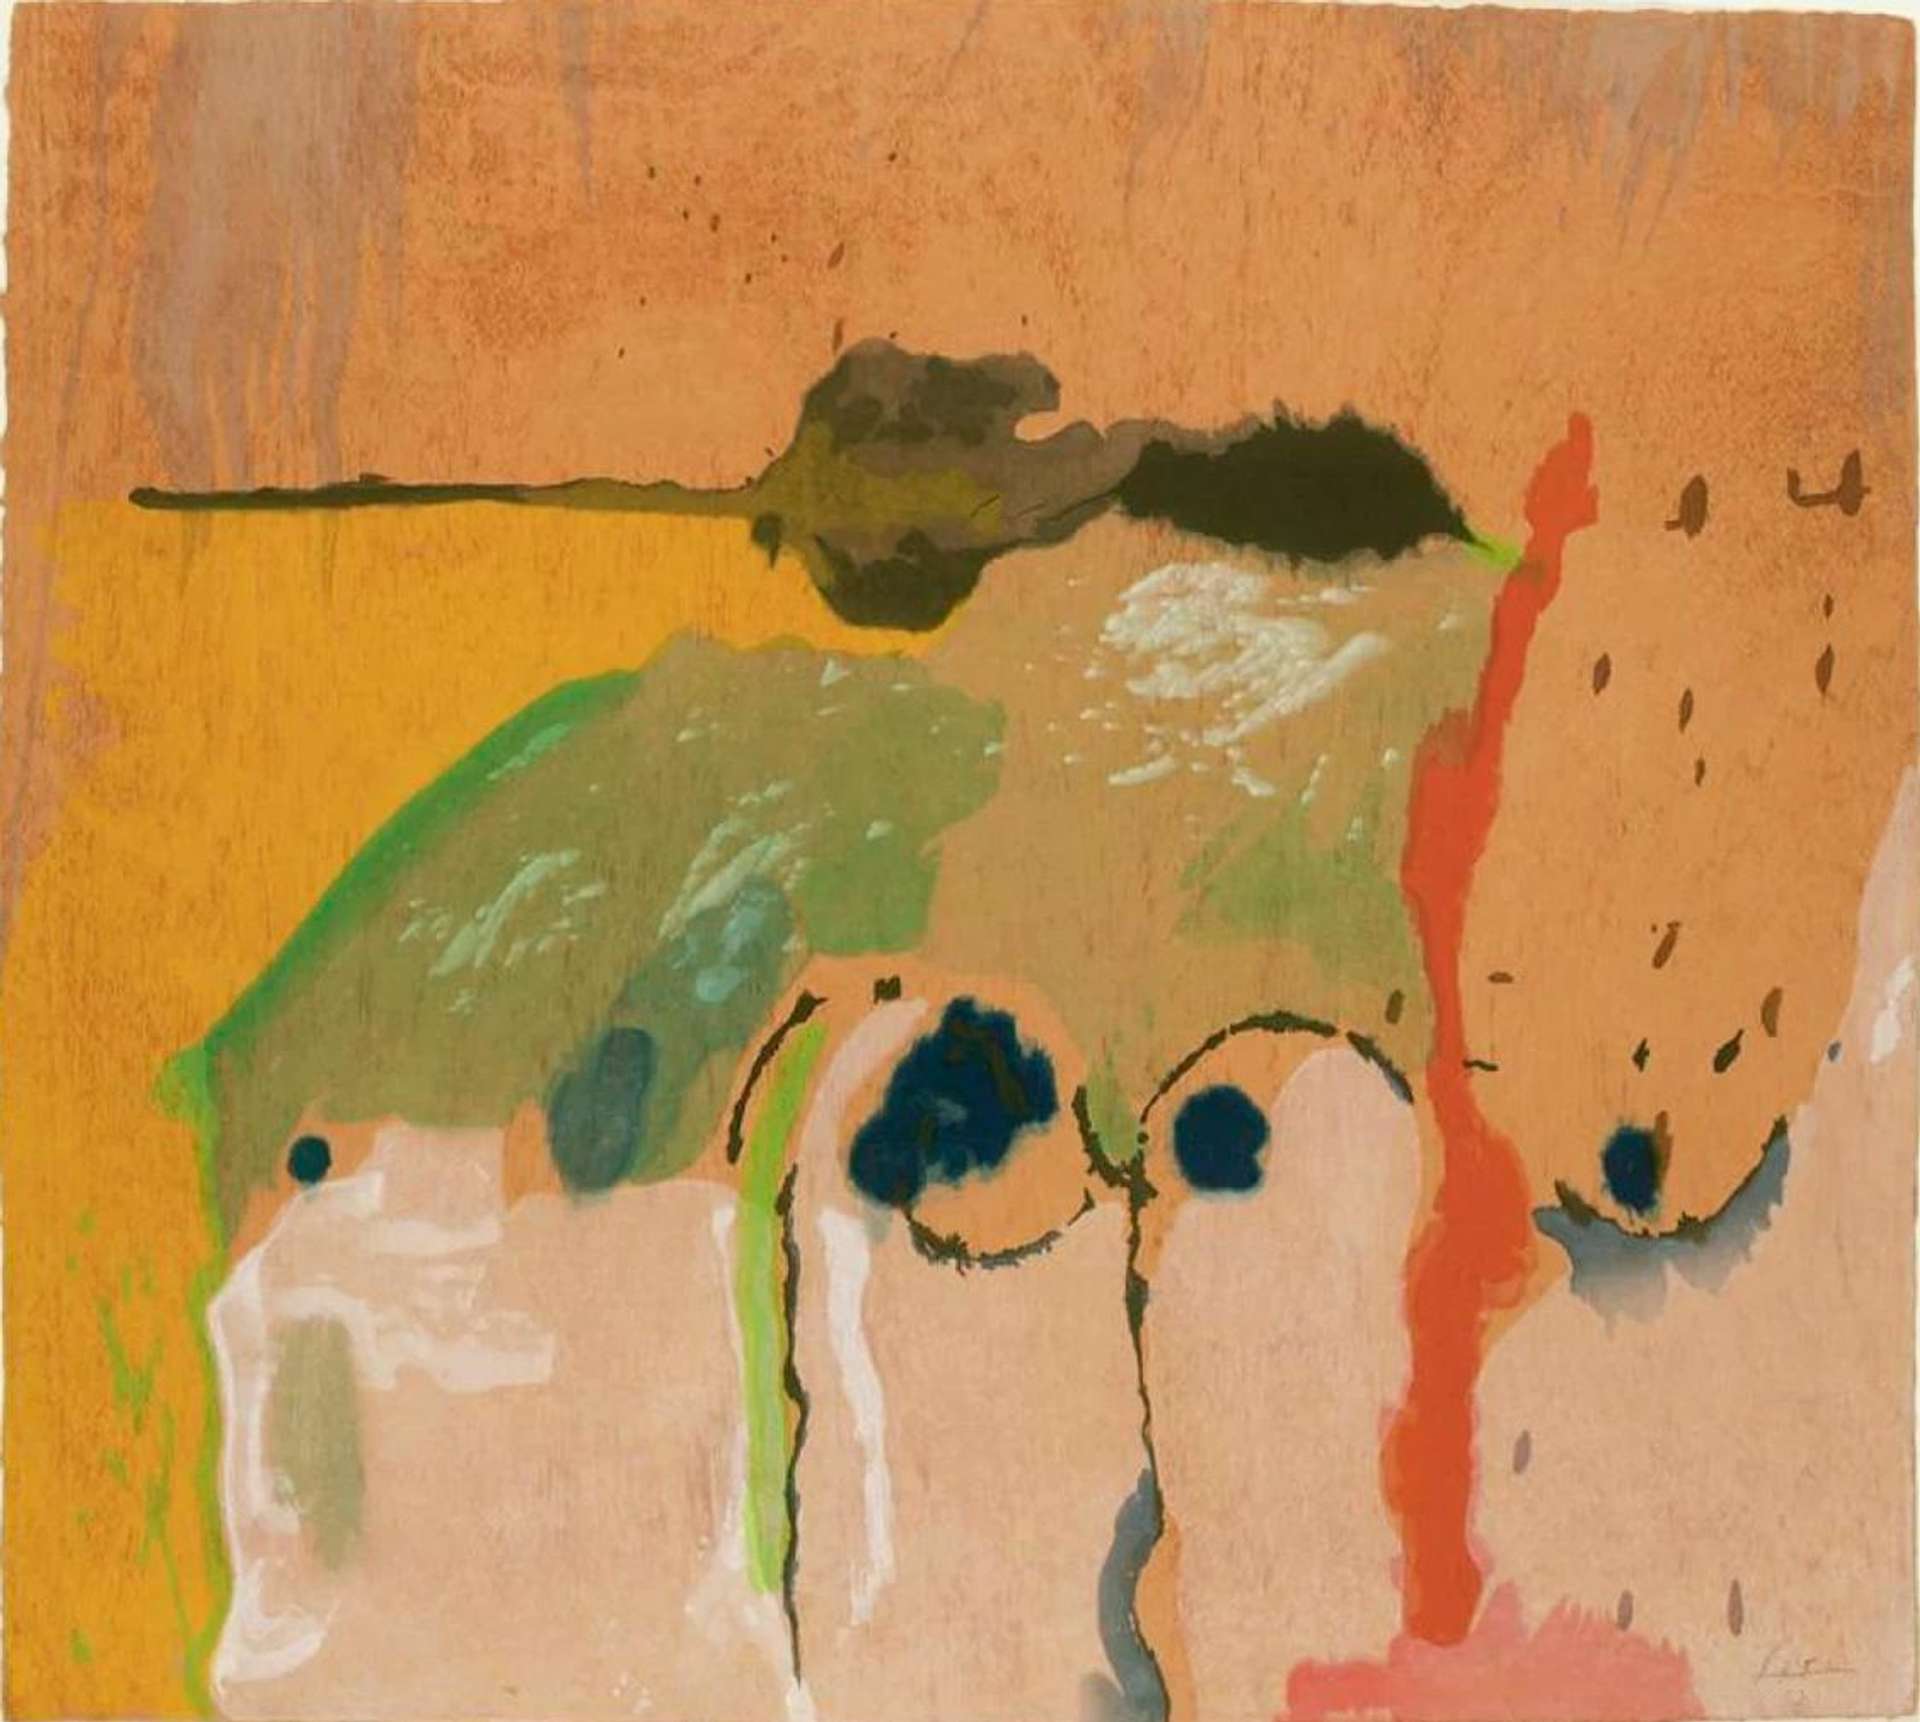 Helen Frankenthaler’s Tales Of Genji I. An abstract expressionist woodcut print of an orange based landscape with various accent colours. 